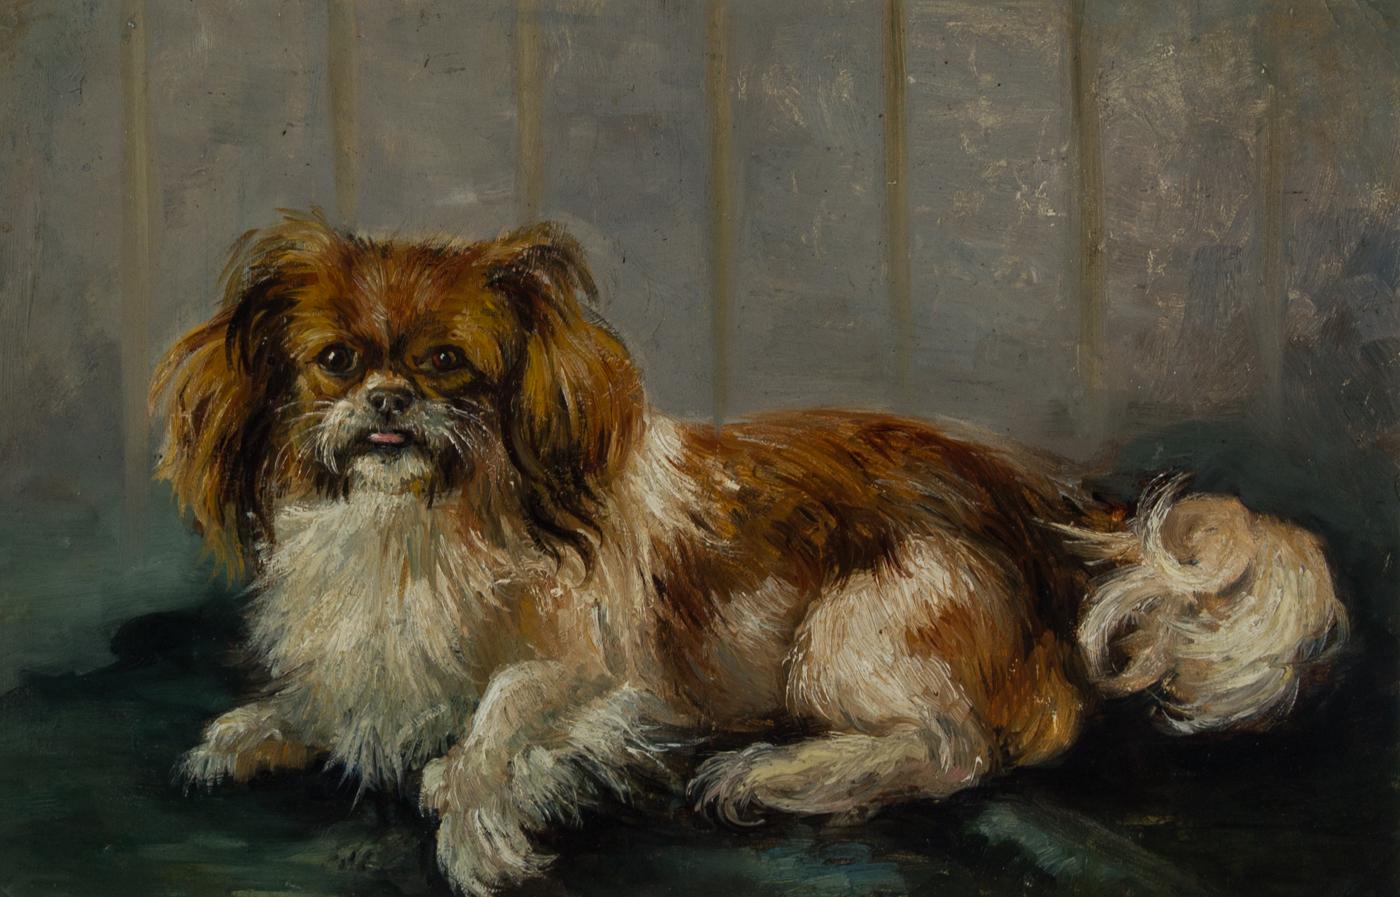 Framed Mid 20th Century Oil - Pekingese Dog - Painting by Unknown